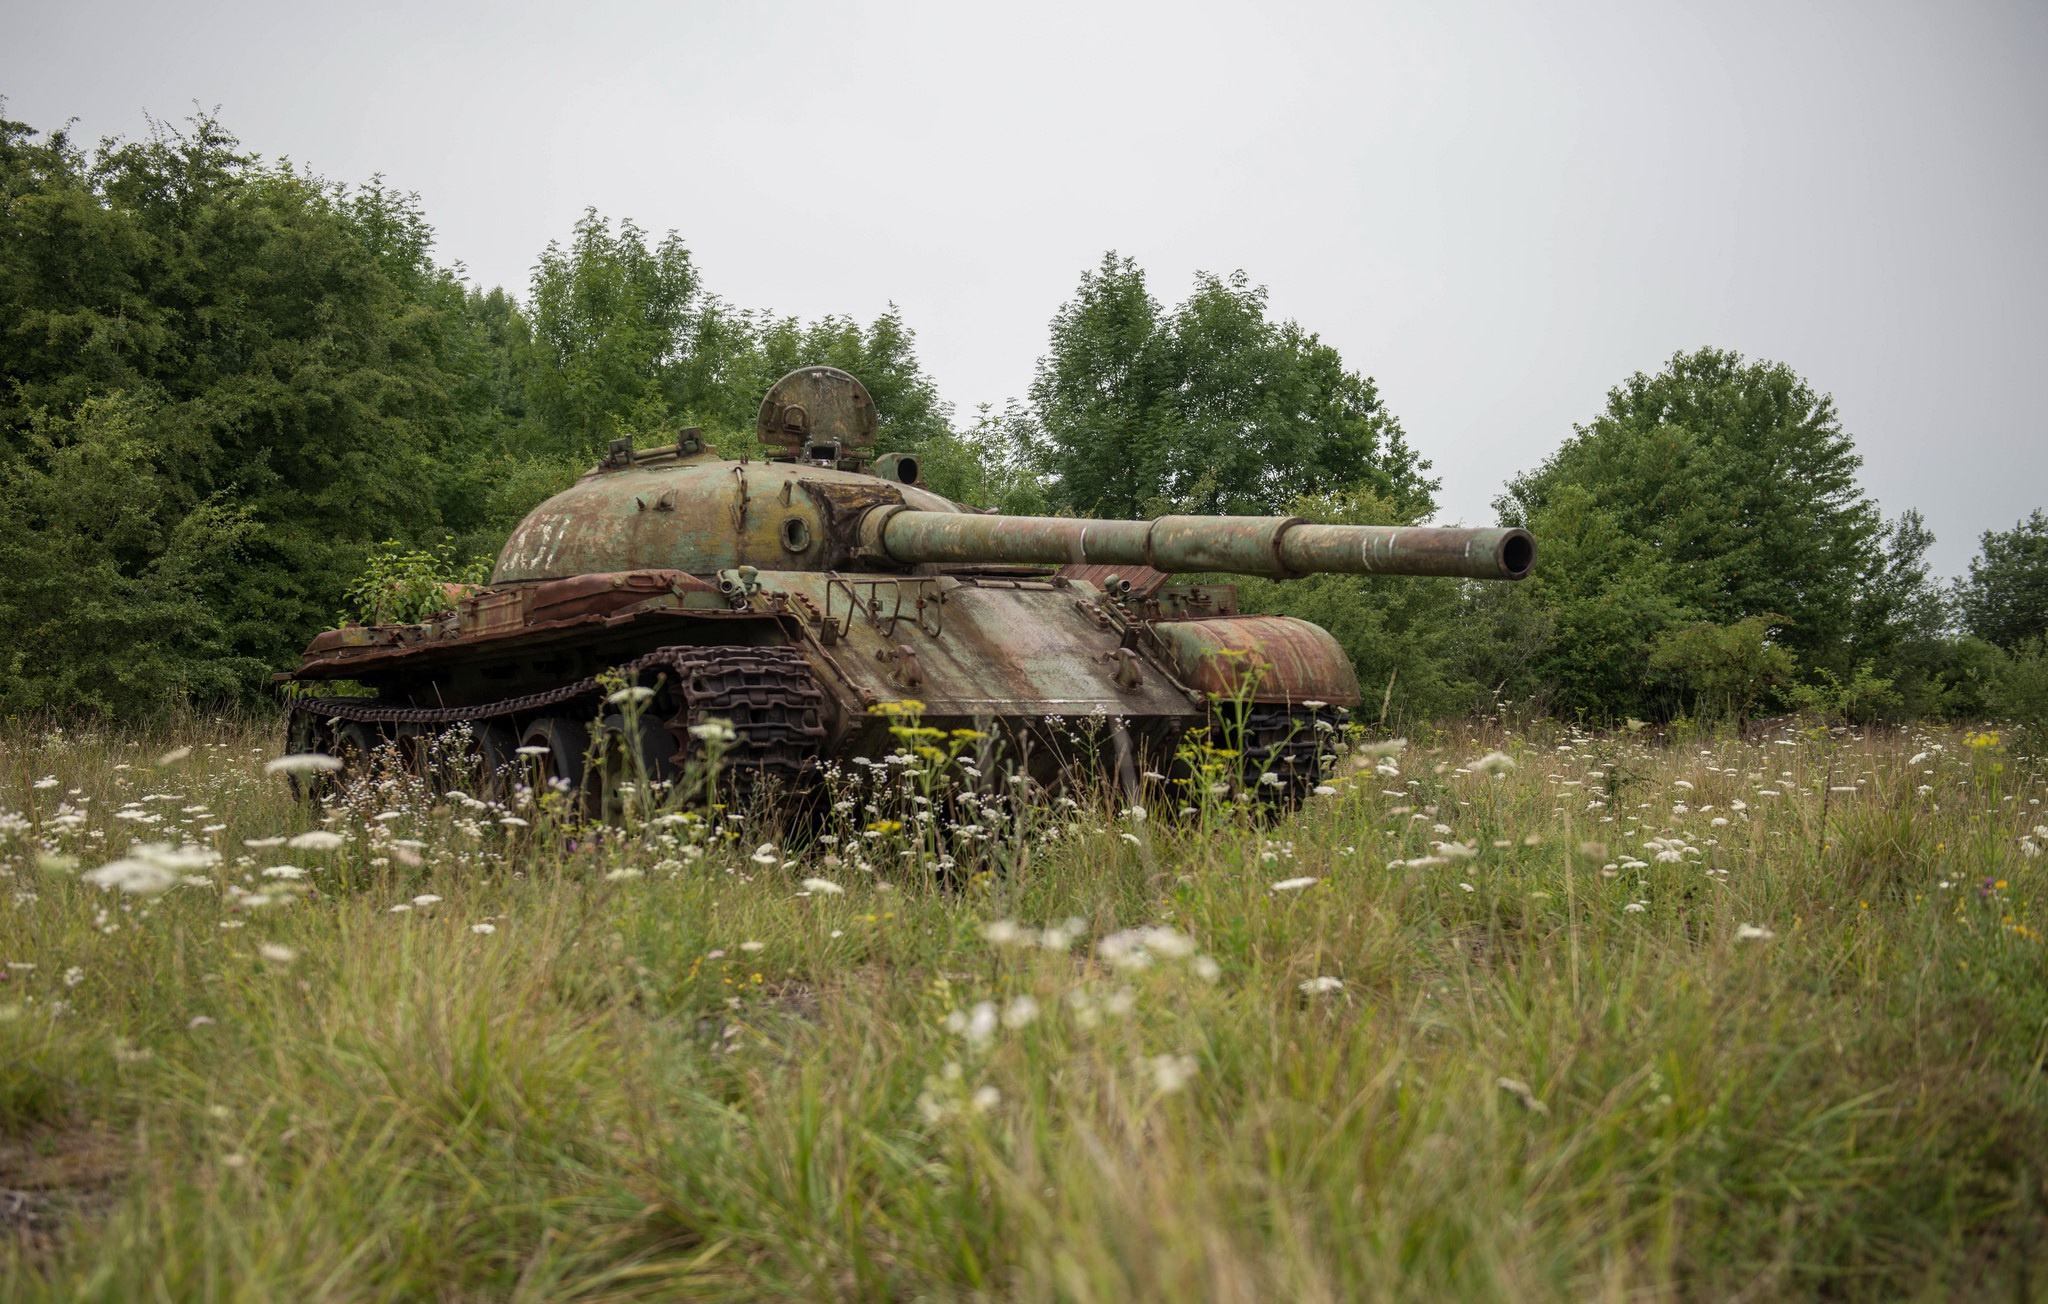 tank, Grass, Wreck, Military, Old, Vehicle Wallpaper